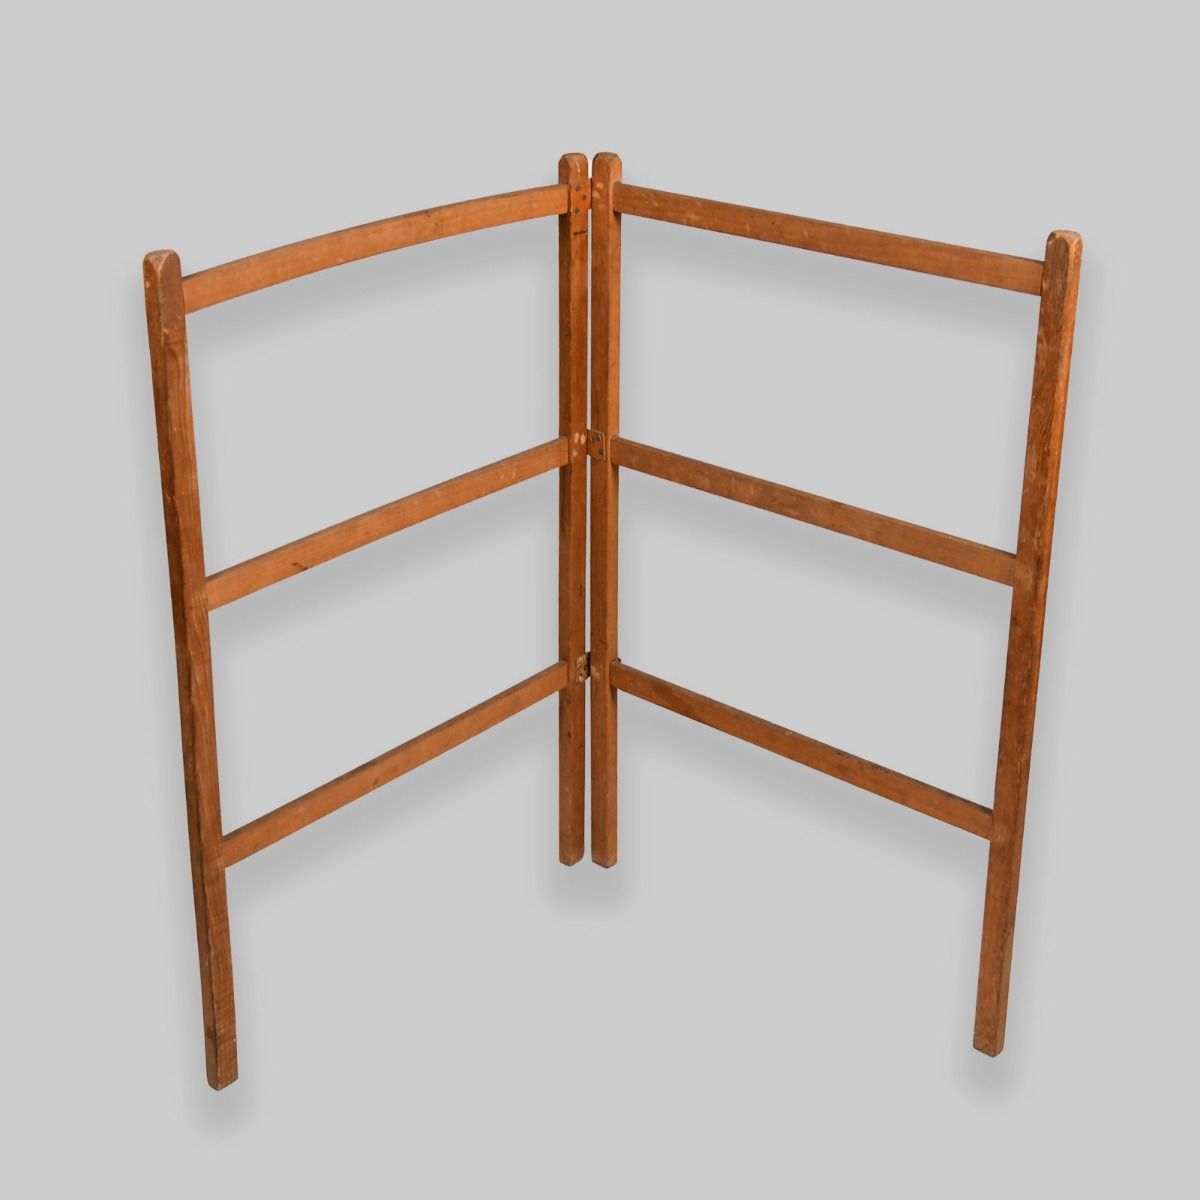 Vintage Wooden Clothes Maiden Horse Laundry Rack 